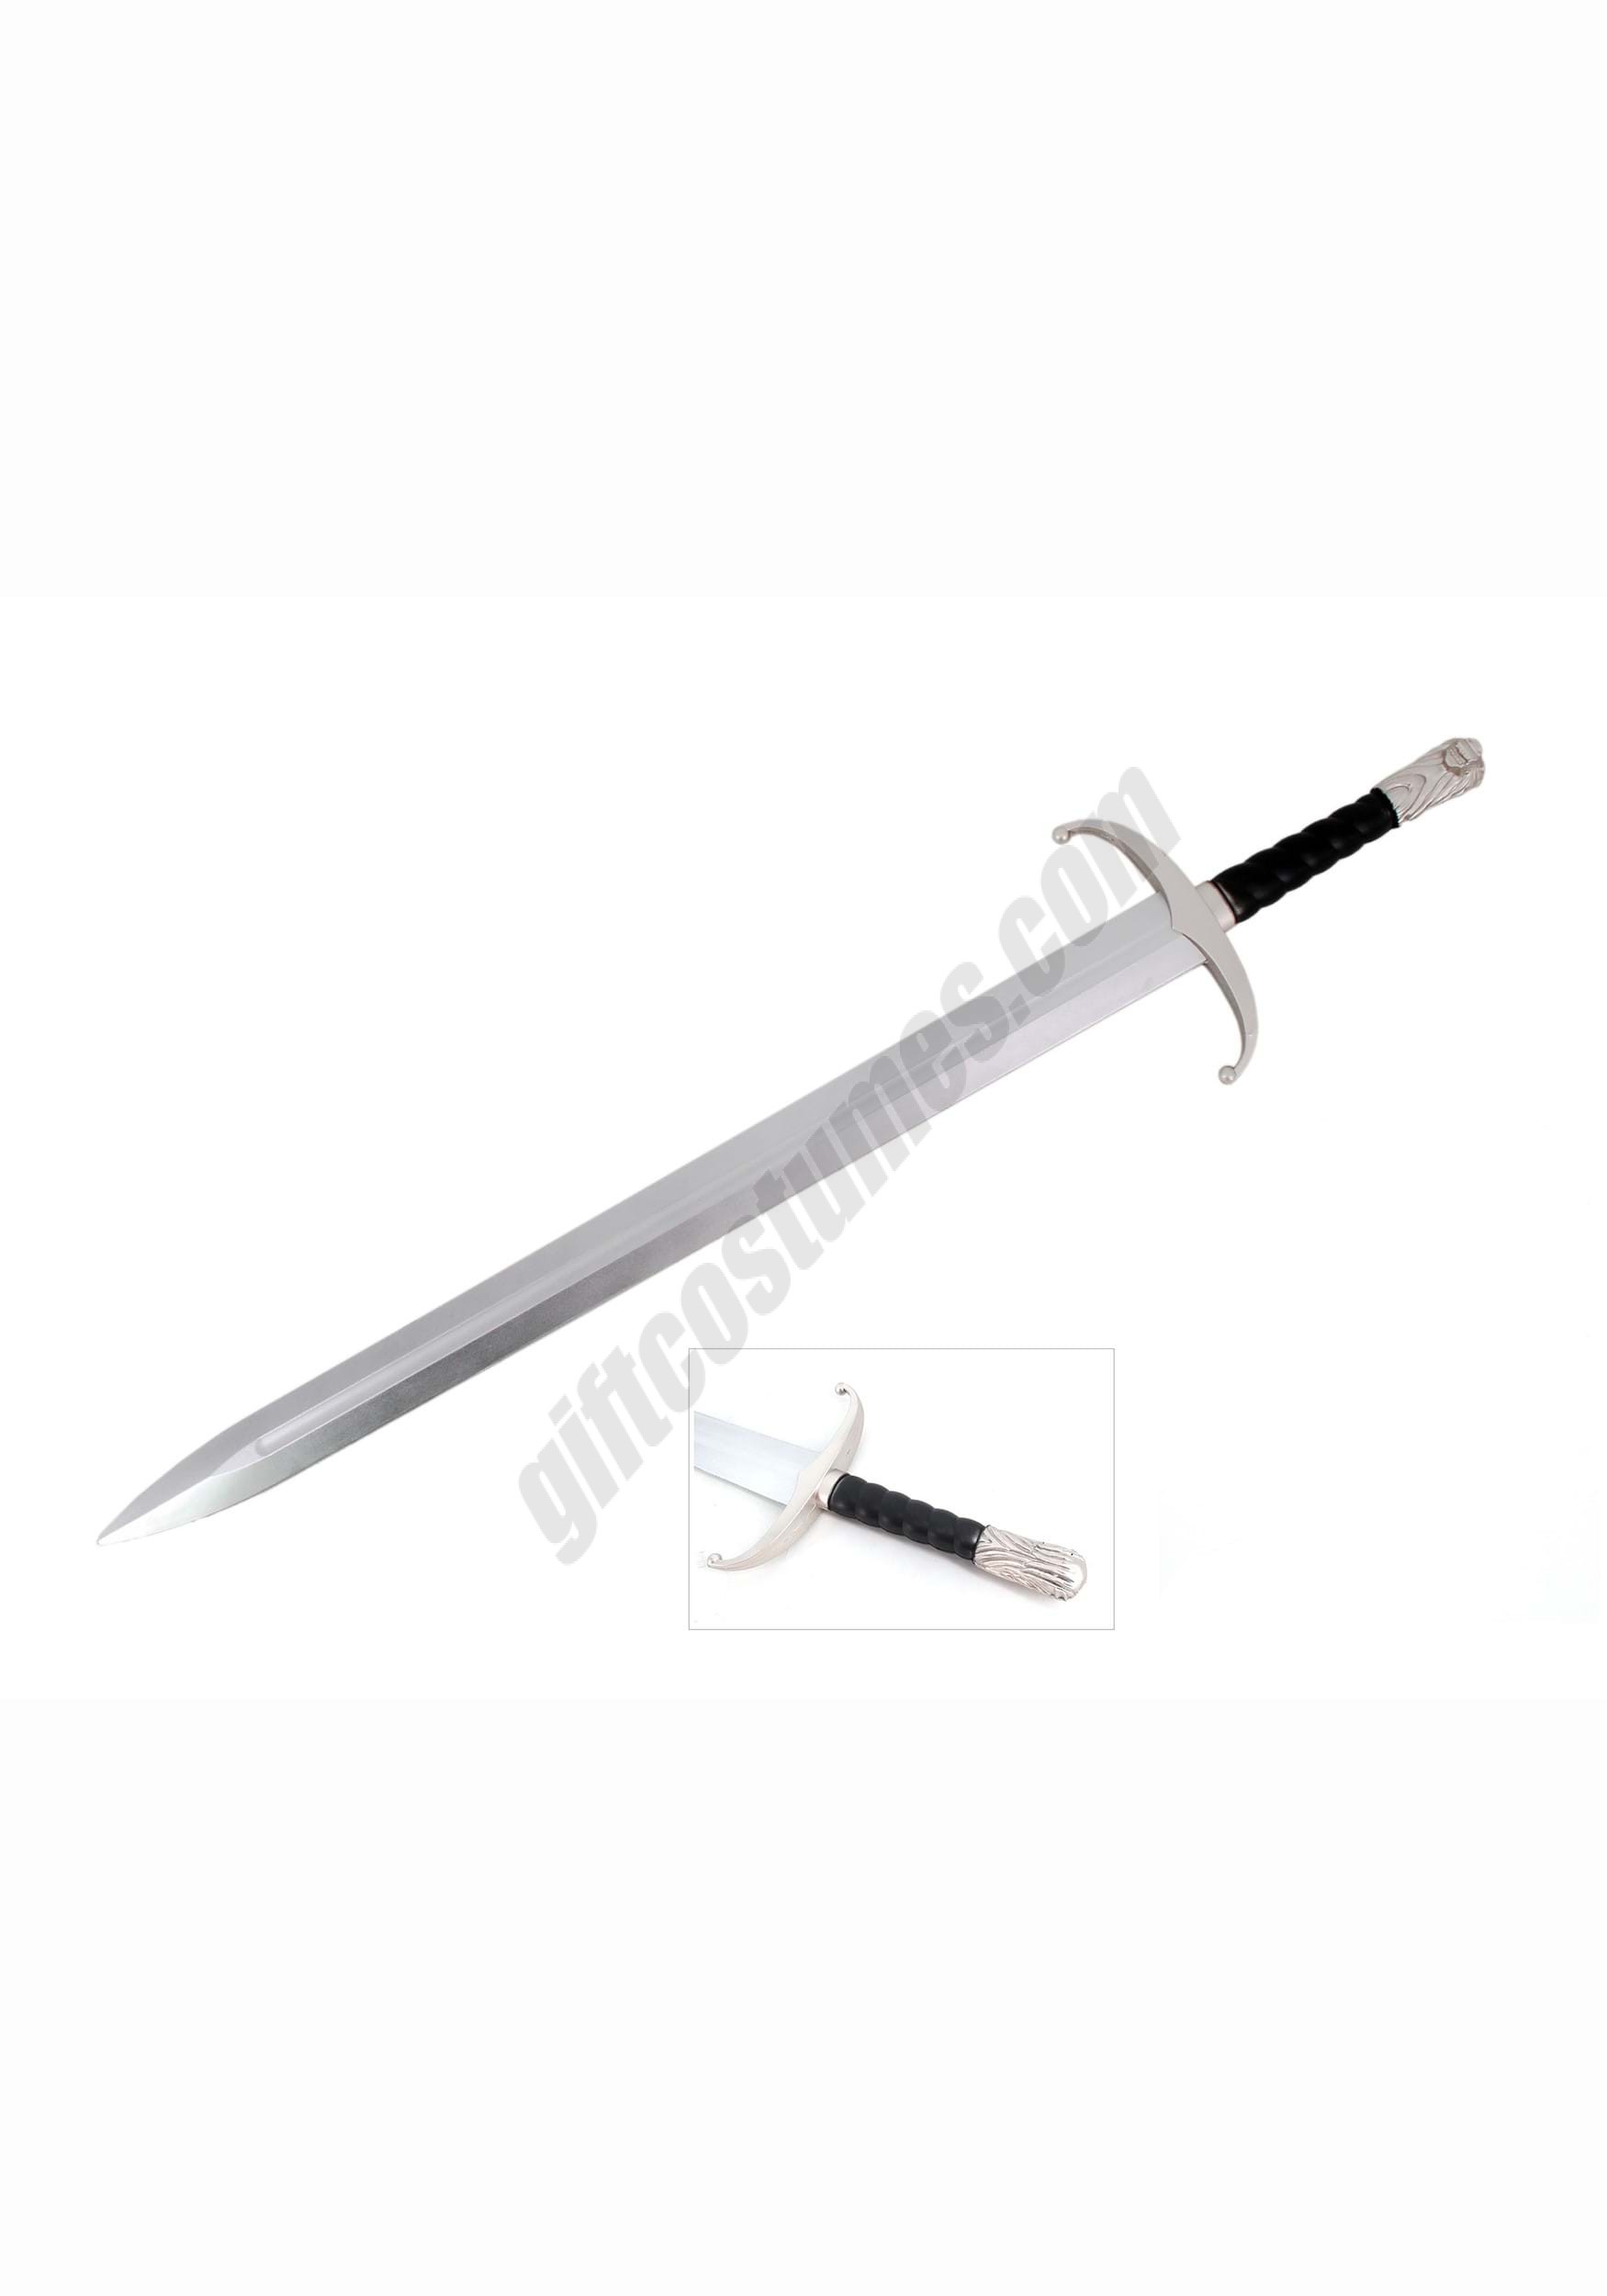 Northern King Sword Costume Accessory Promotions - Northern King Sword Costume Accessory Promotions